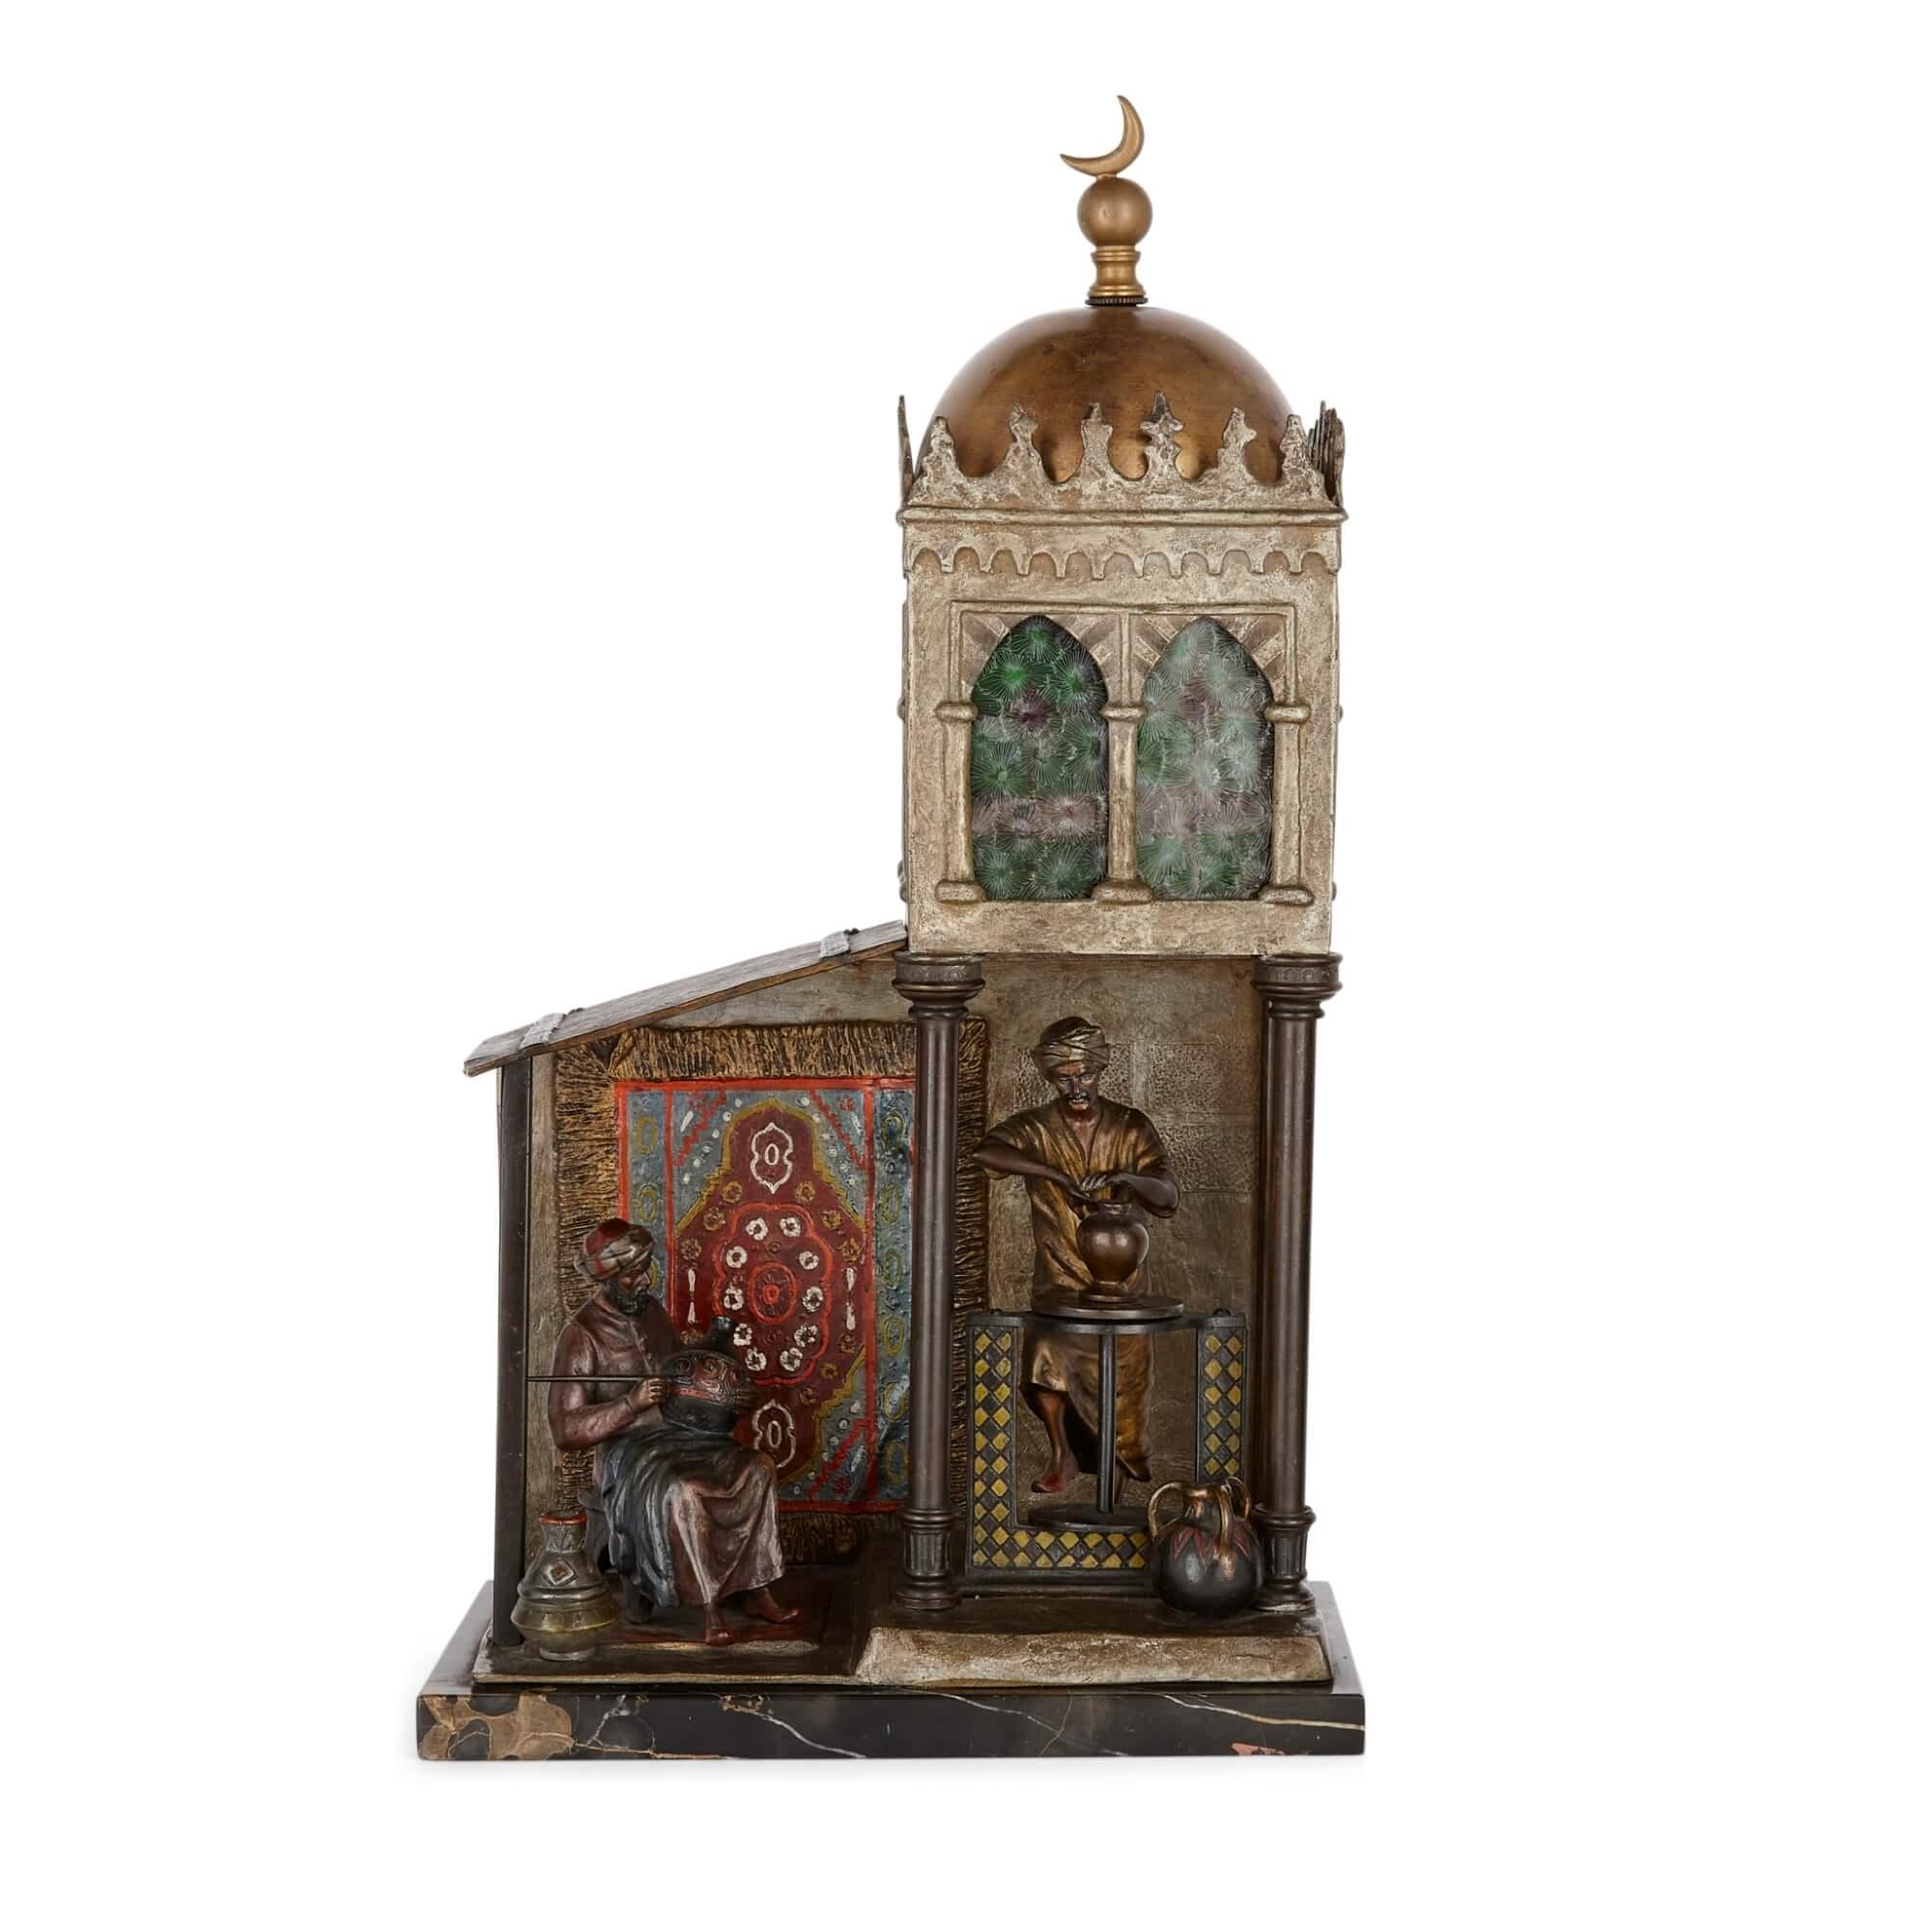 Austrian cold-painted bronze and marble figurative lamp attributed to Bergman 
Austrian, c. 1910
Height 46cm, width 26cm, depth 16cm

This impressive cold-painted bronze lamp showcases a charming and unusual scene of two artists working in a pottery